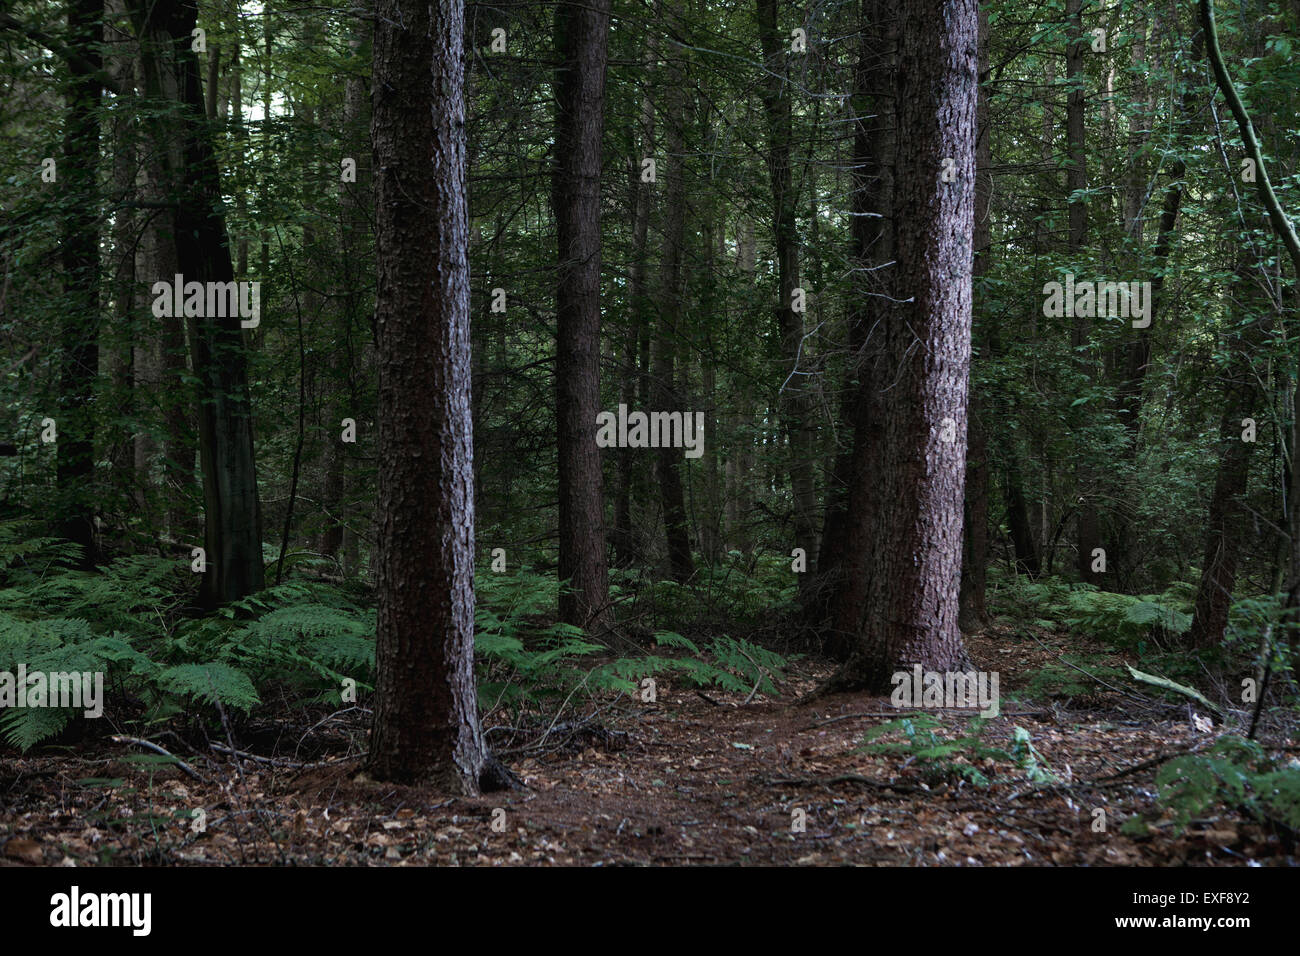 View of dense forest with ferns Stock Photo